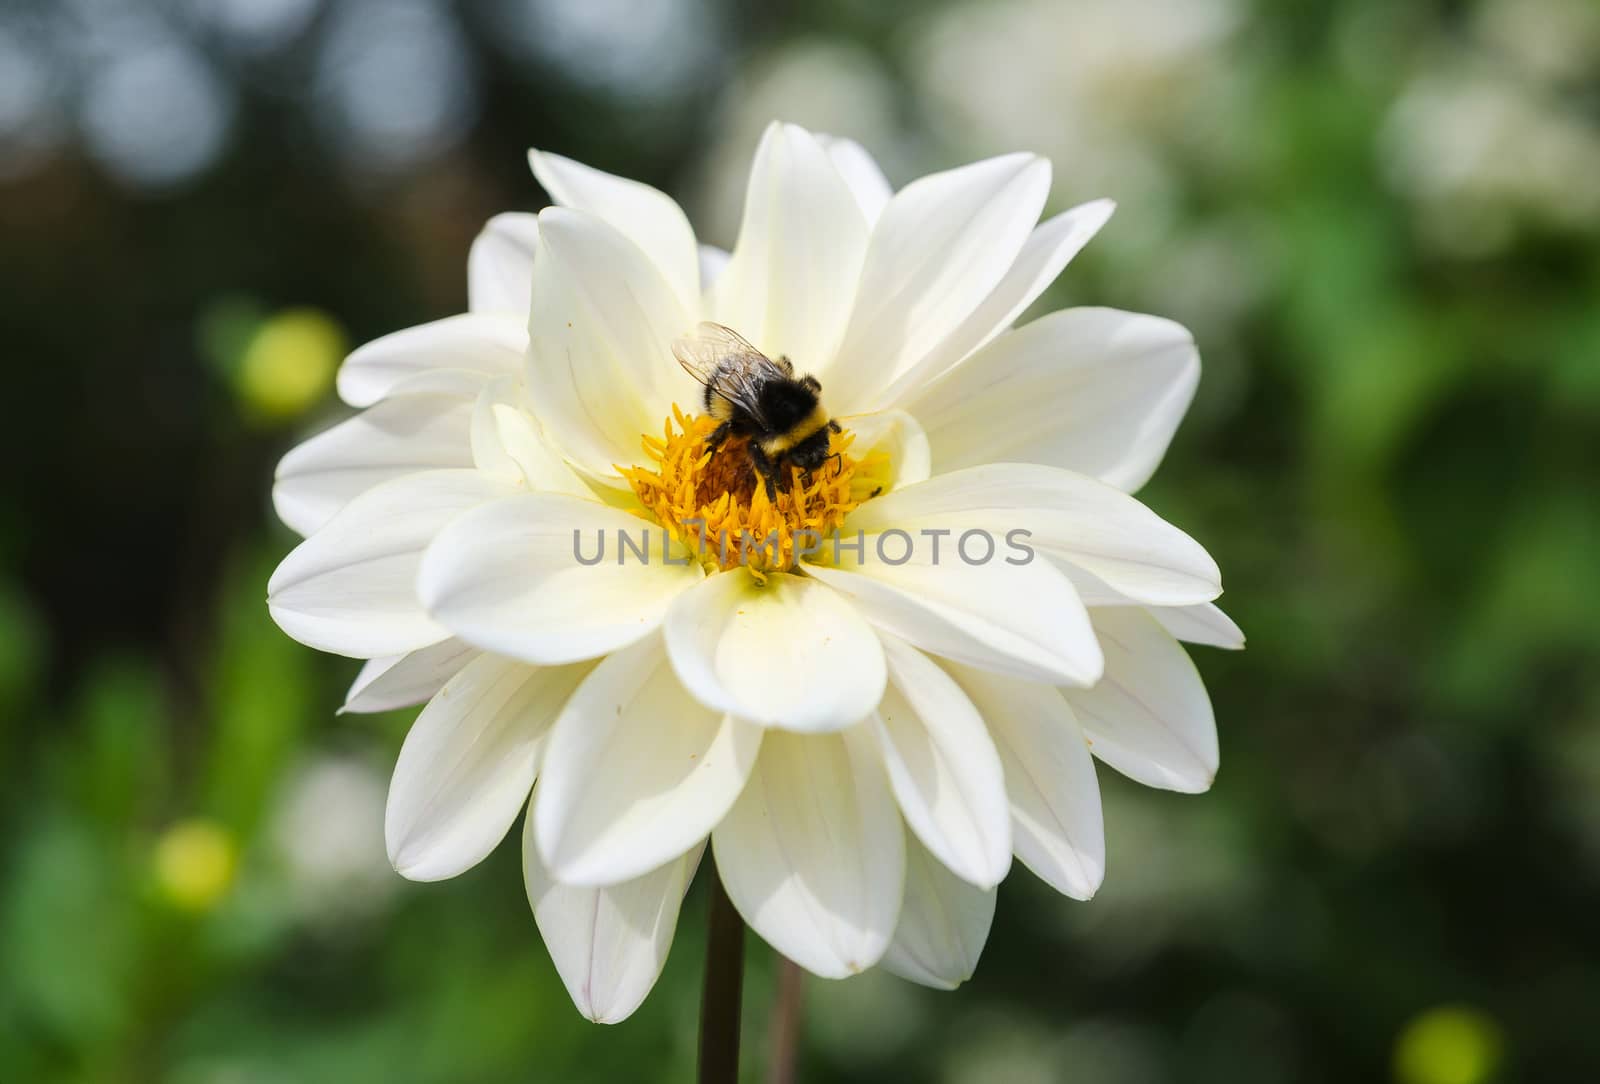 a lovely flower in the dahlia family with a bumblebee